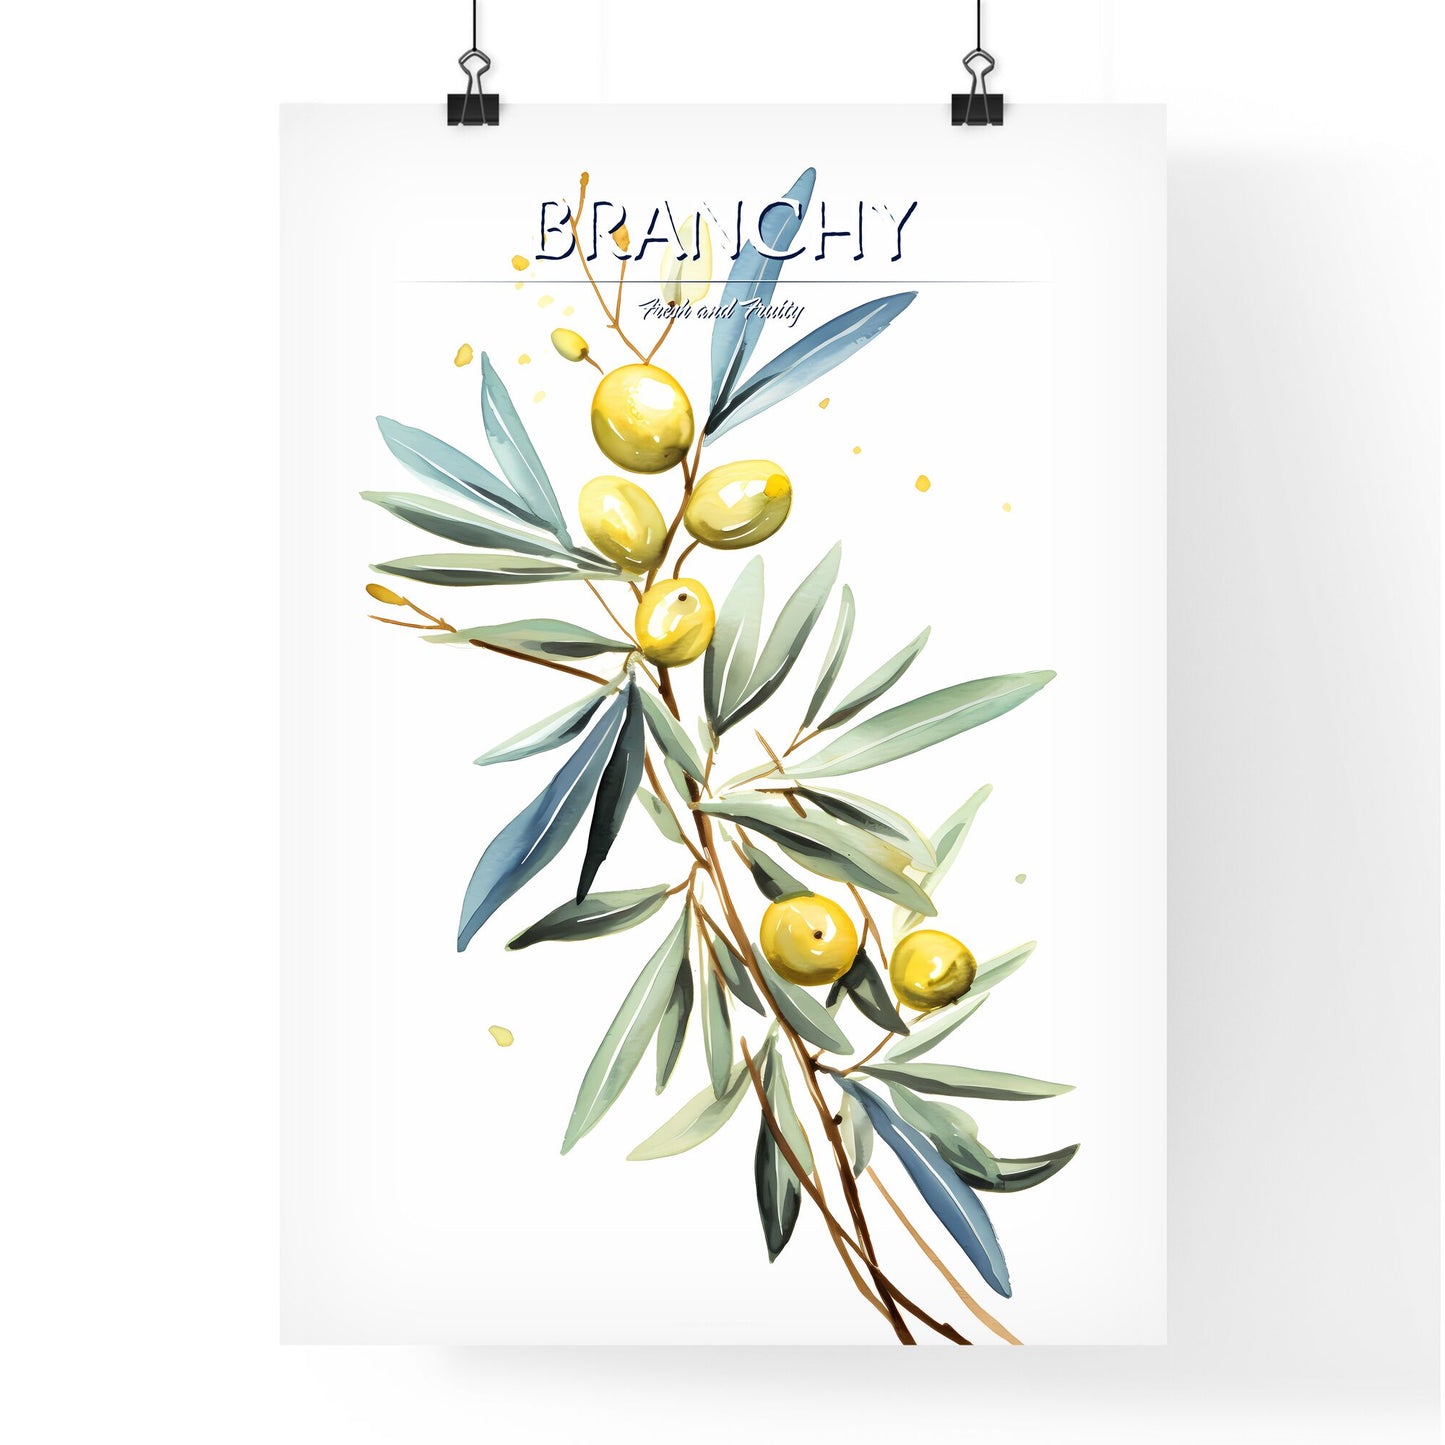 Watercolor Painting Of A Branch With Leaves And Fruits Art Print Default Title